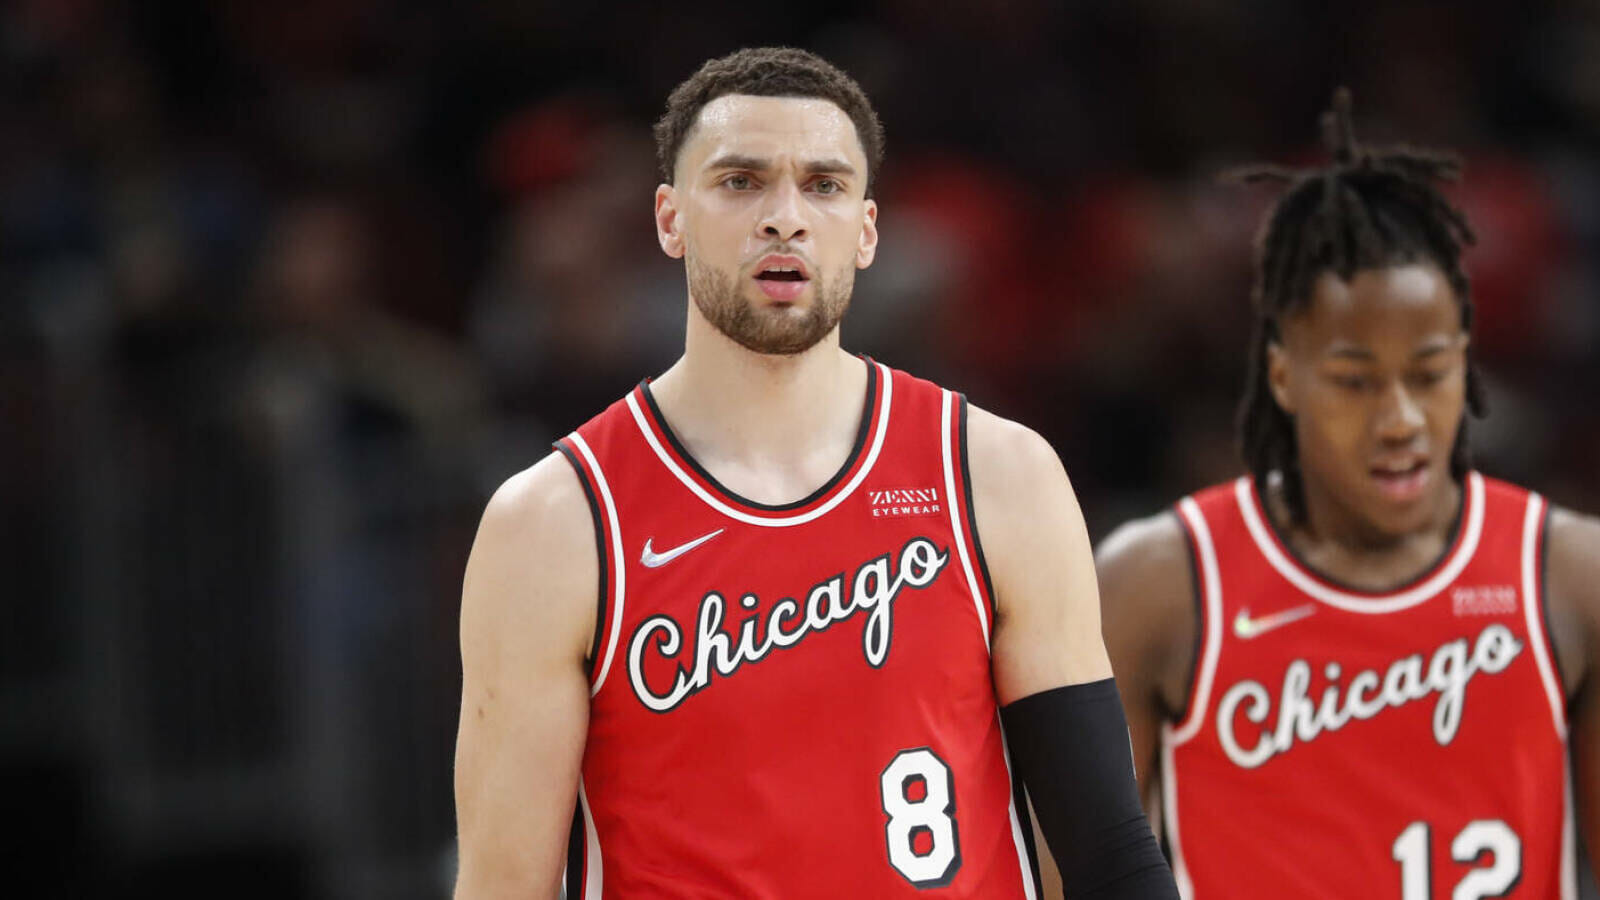 Mar 31, 2022; Chicago, Illinois, USA; Chicago Bulls guard Zach LaVine (8) reacts during the first half of an NBA game against the LA Clippers at United Center. Mandatory Credit: Kamil Krzaczynski-USA TODAY Sports (NBA Rumors)